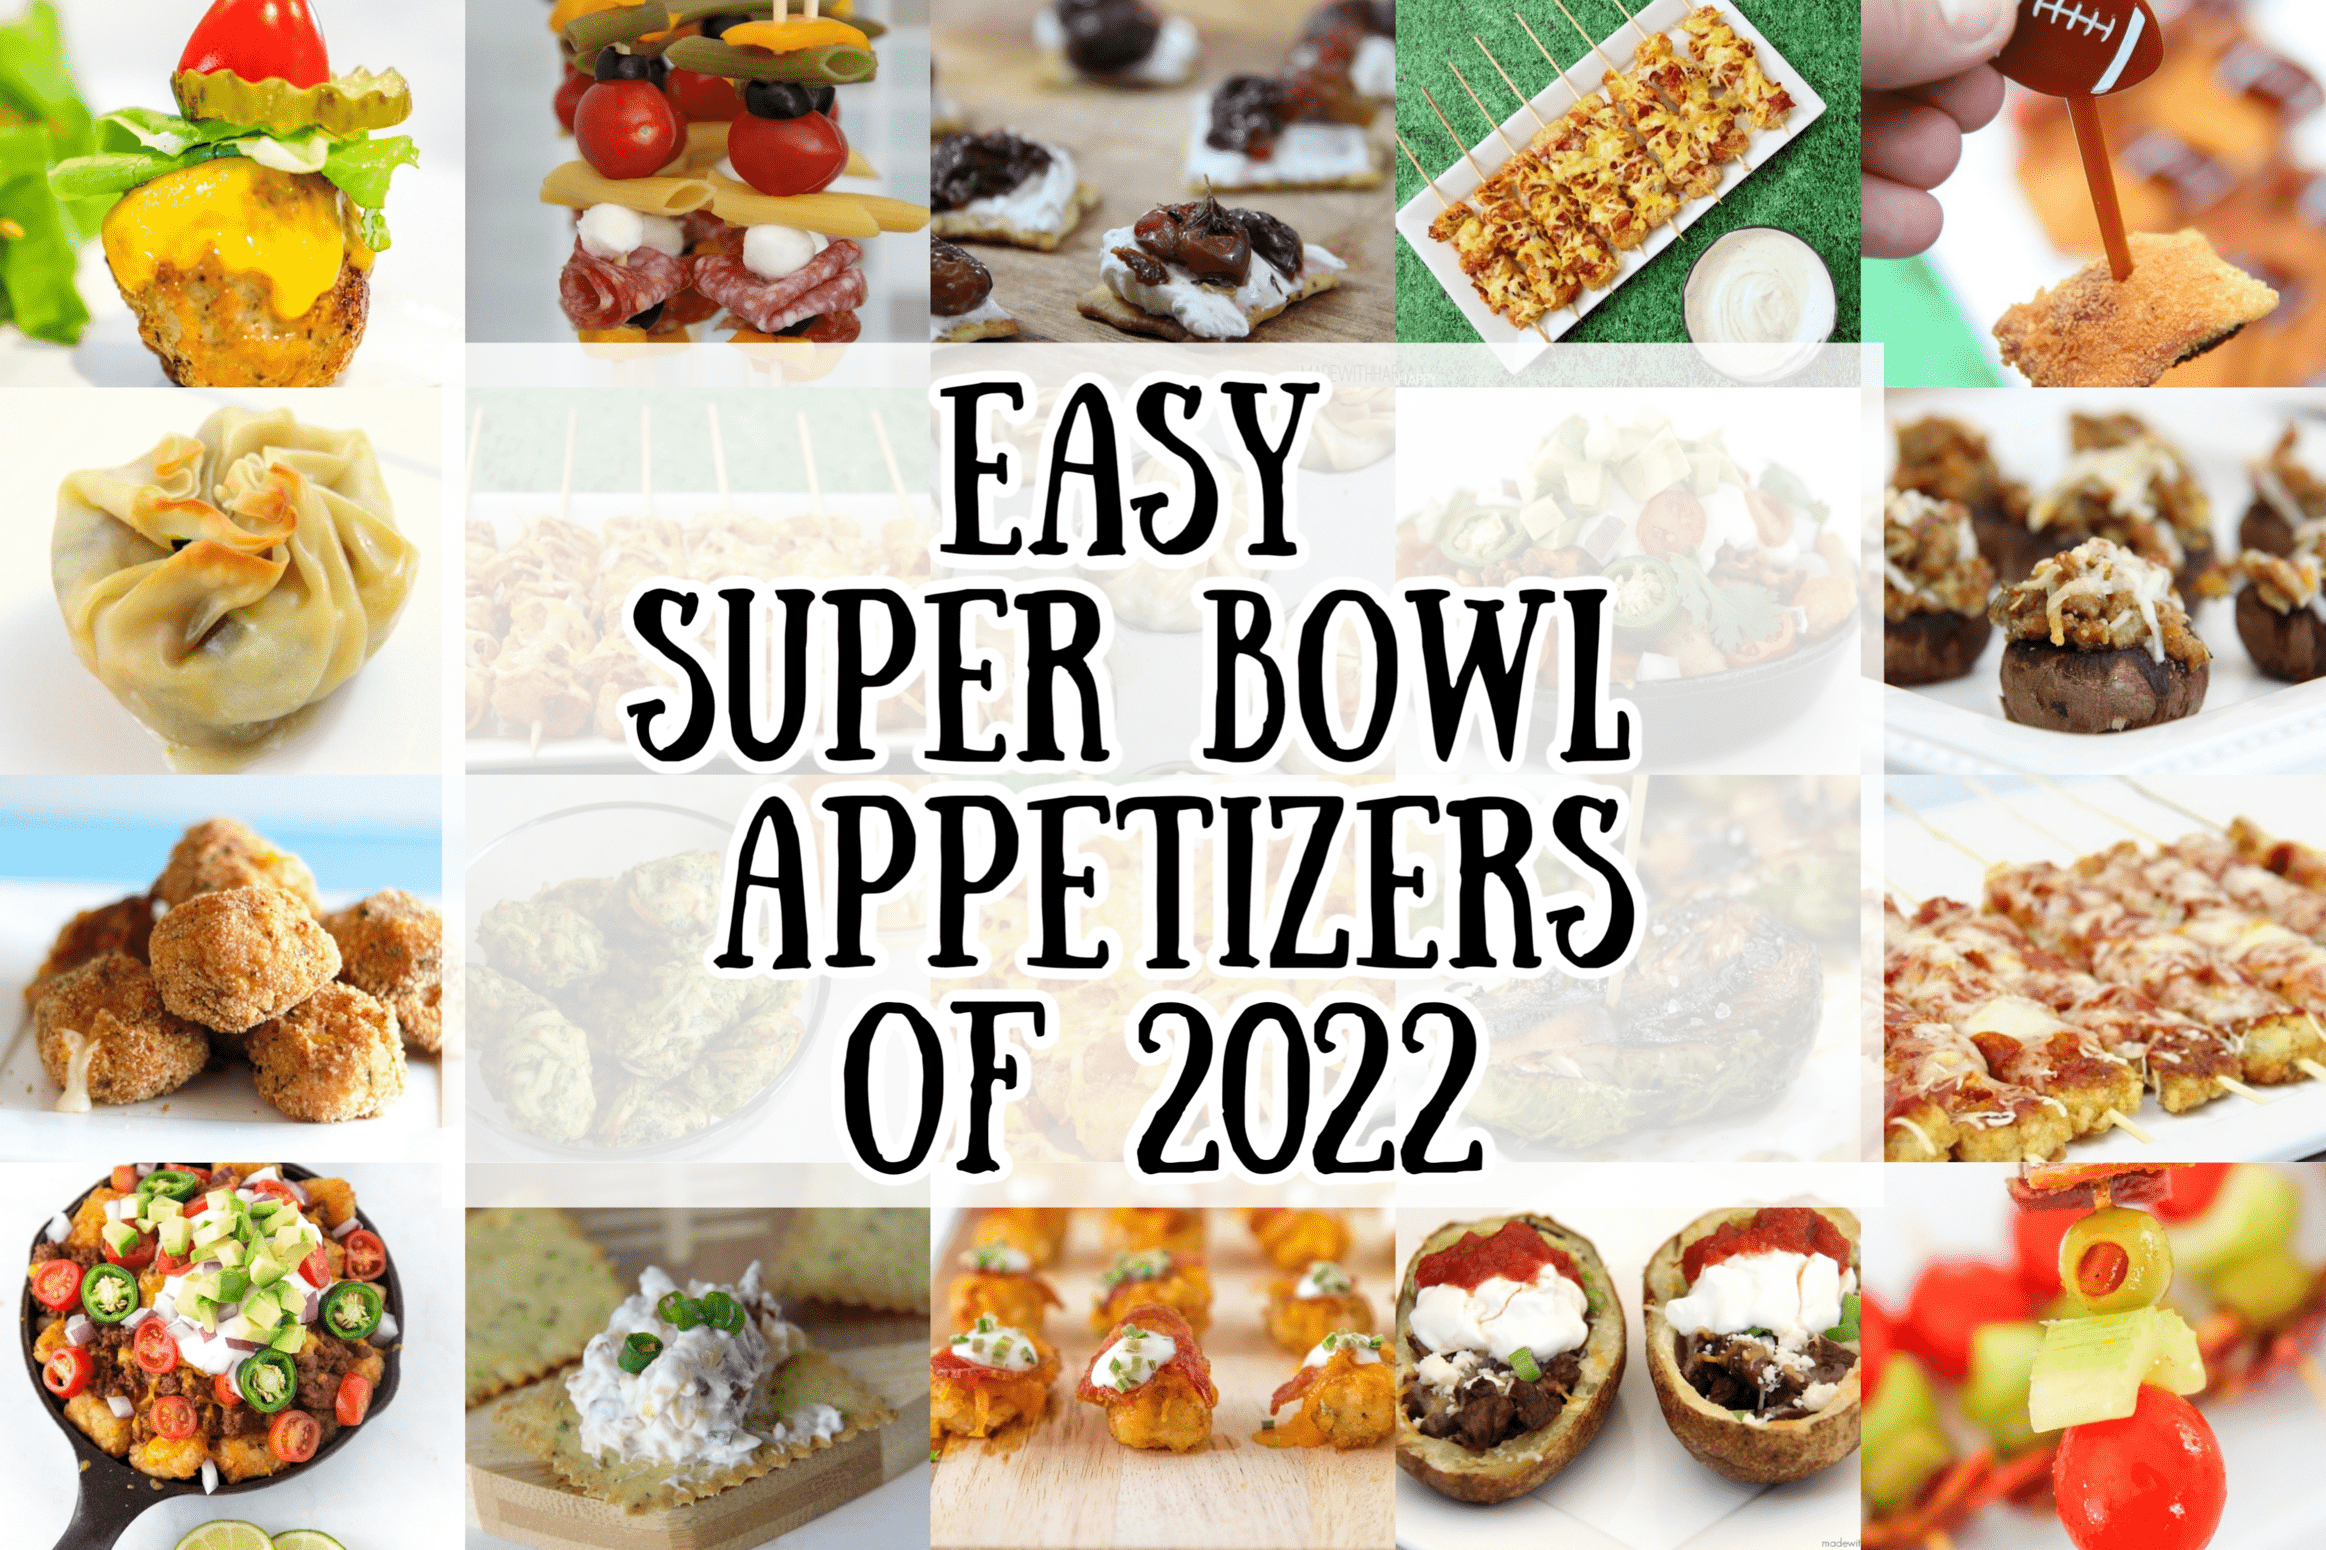 Easy Super Bowl Appetizers of 2022 - Made with HAPPY